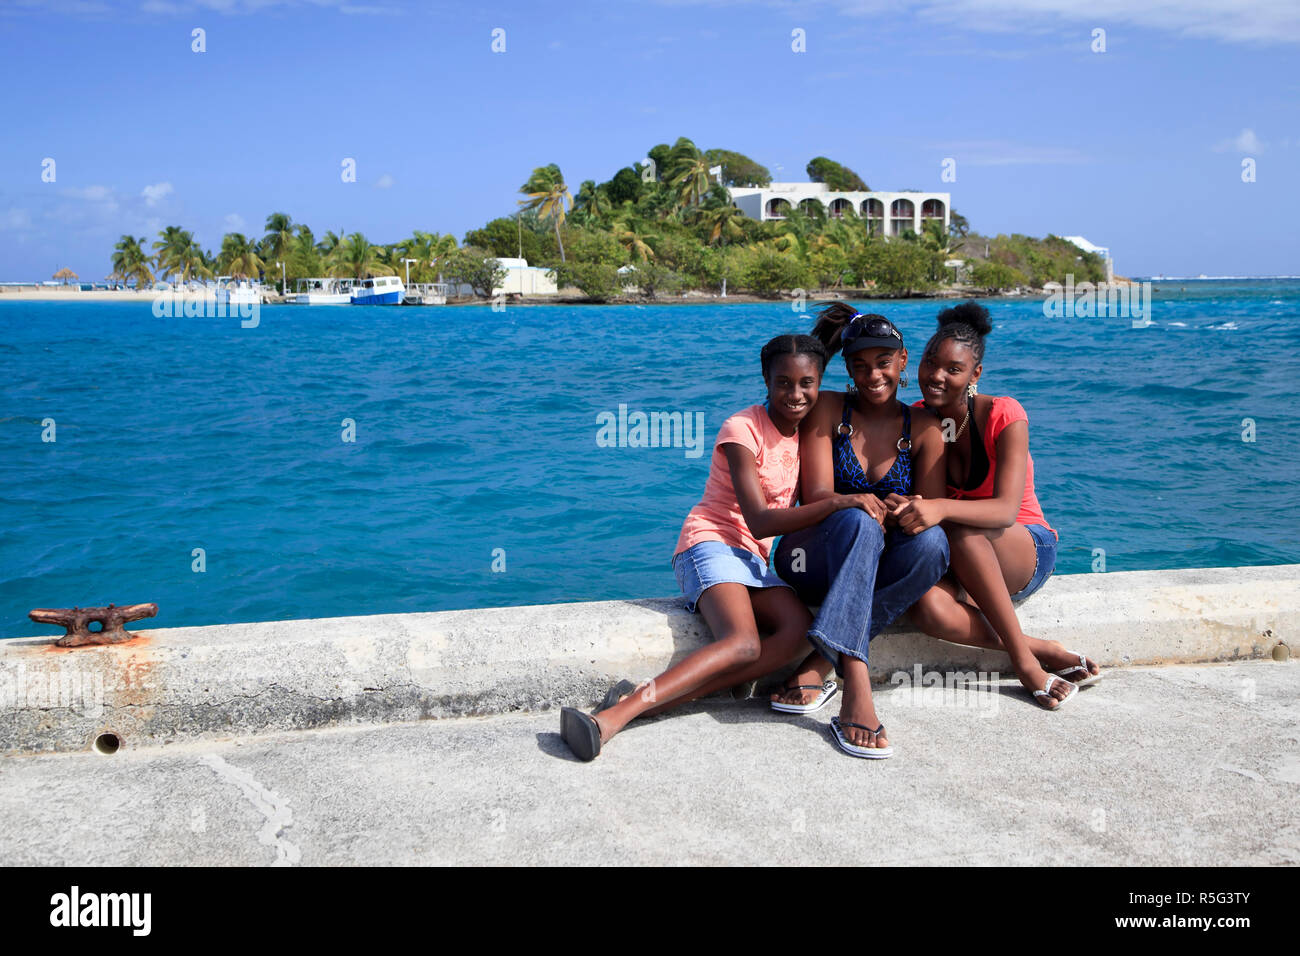 Caribbean, US Virgin Islands, St. Croix, Christiansted, Protestant Cay, Local Girls Stock Photo